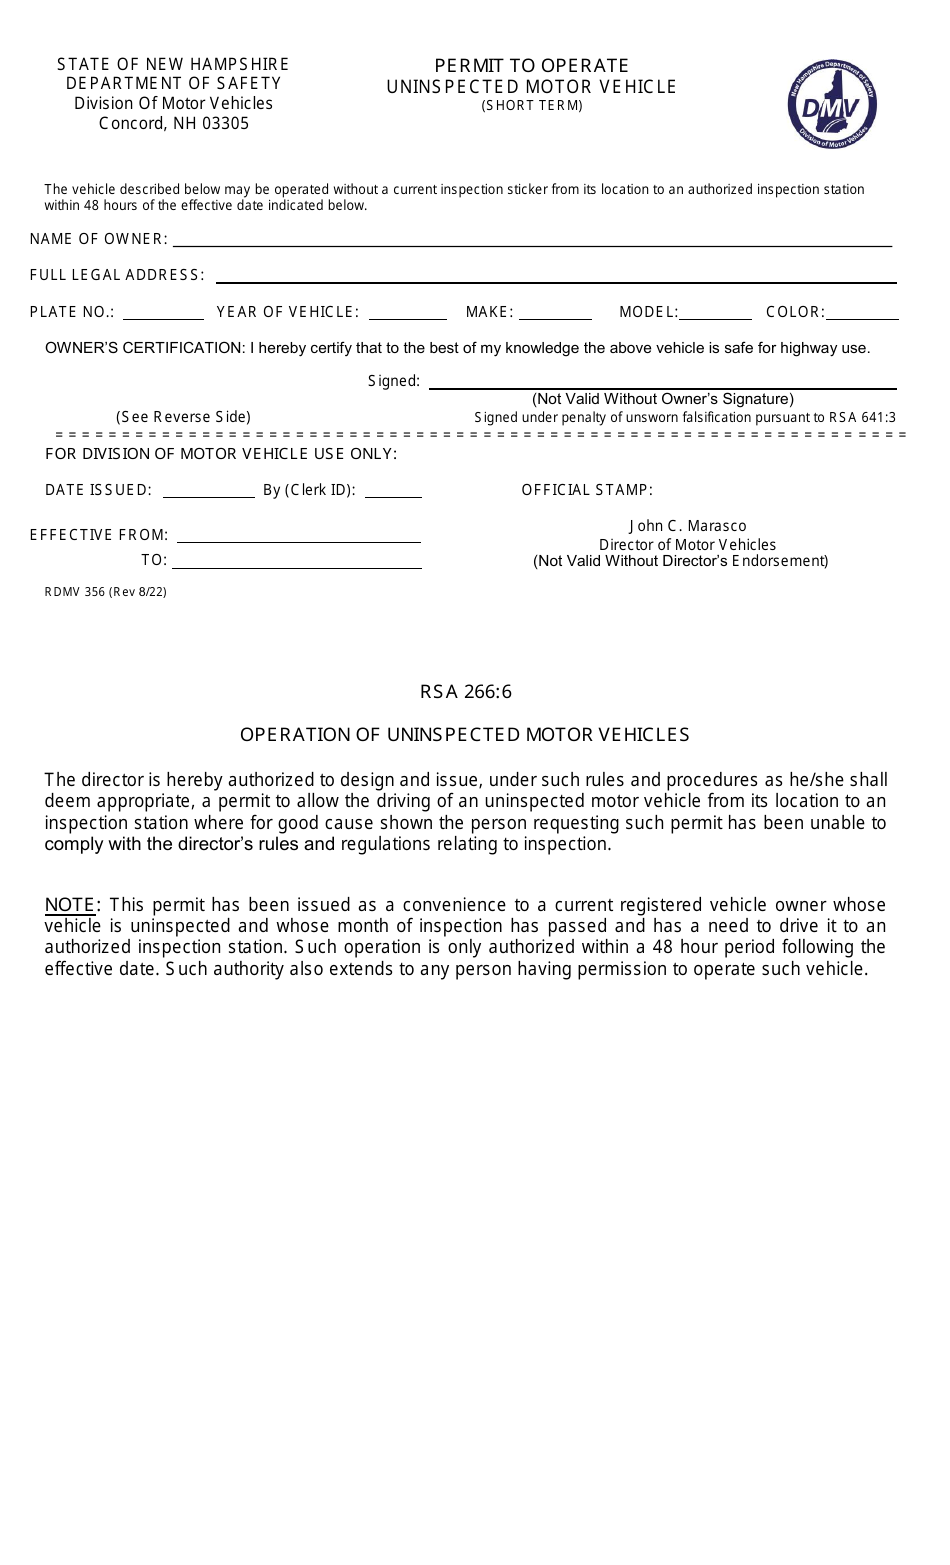 Form RDMV356 Permit to Operate Uninspected Motor Vehicle (Short Term) - New Hampshire, Page 1